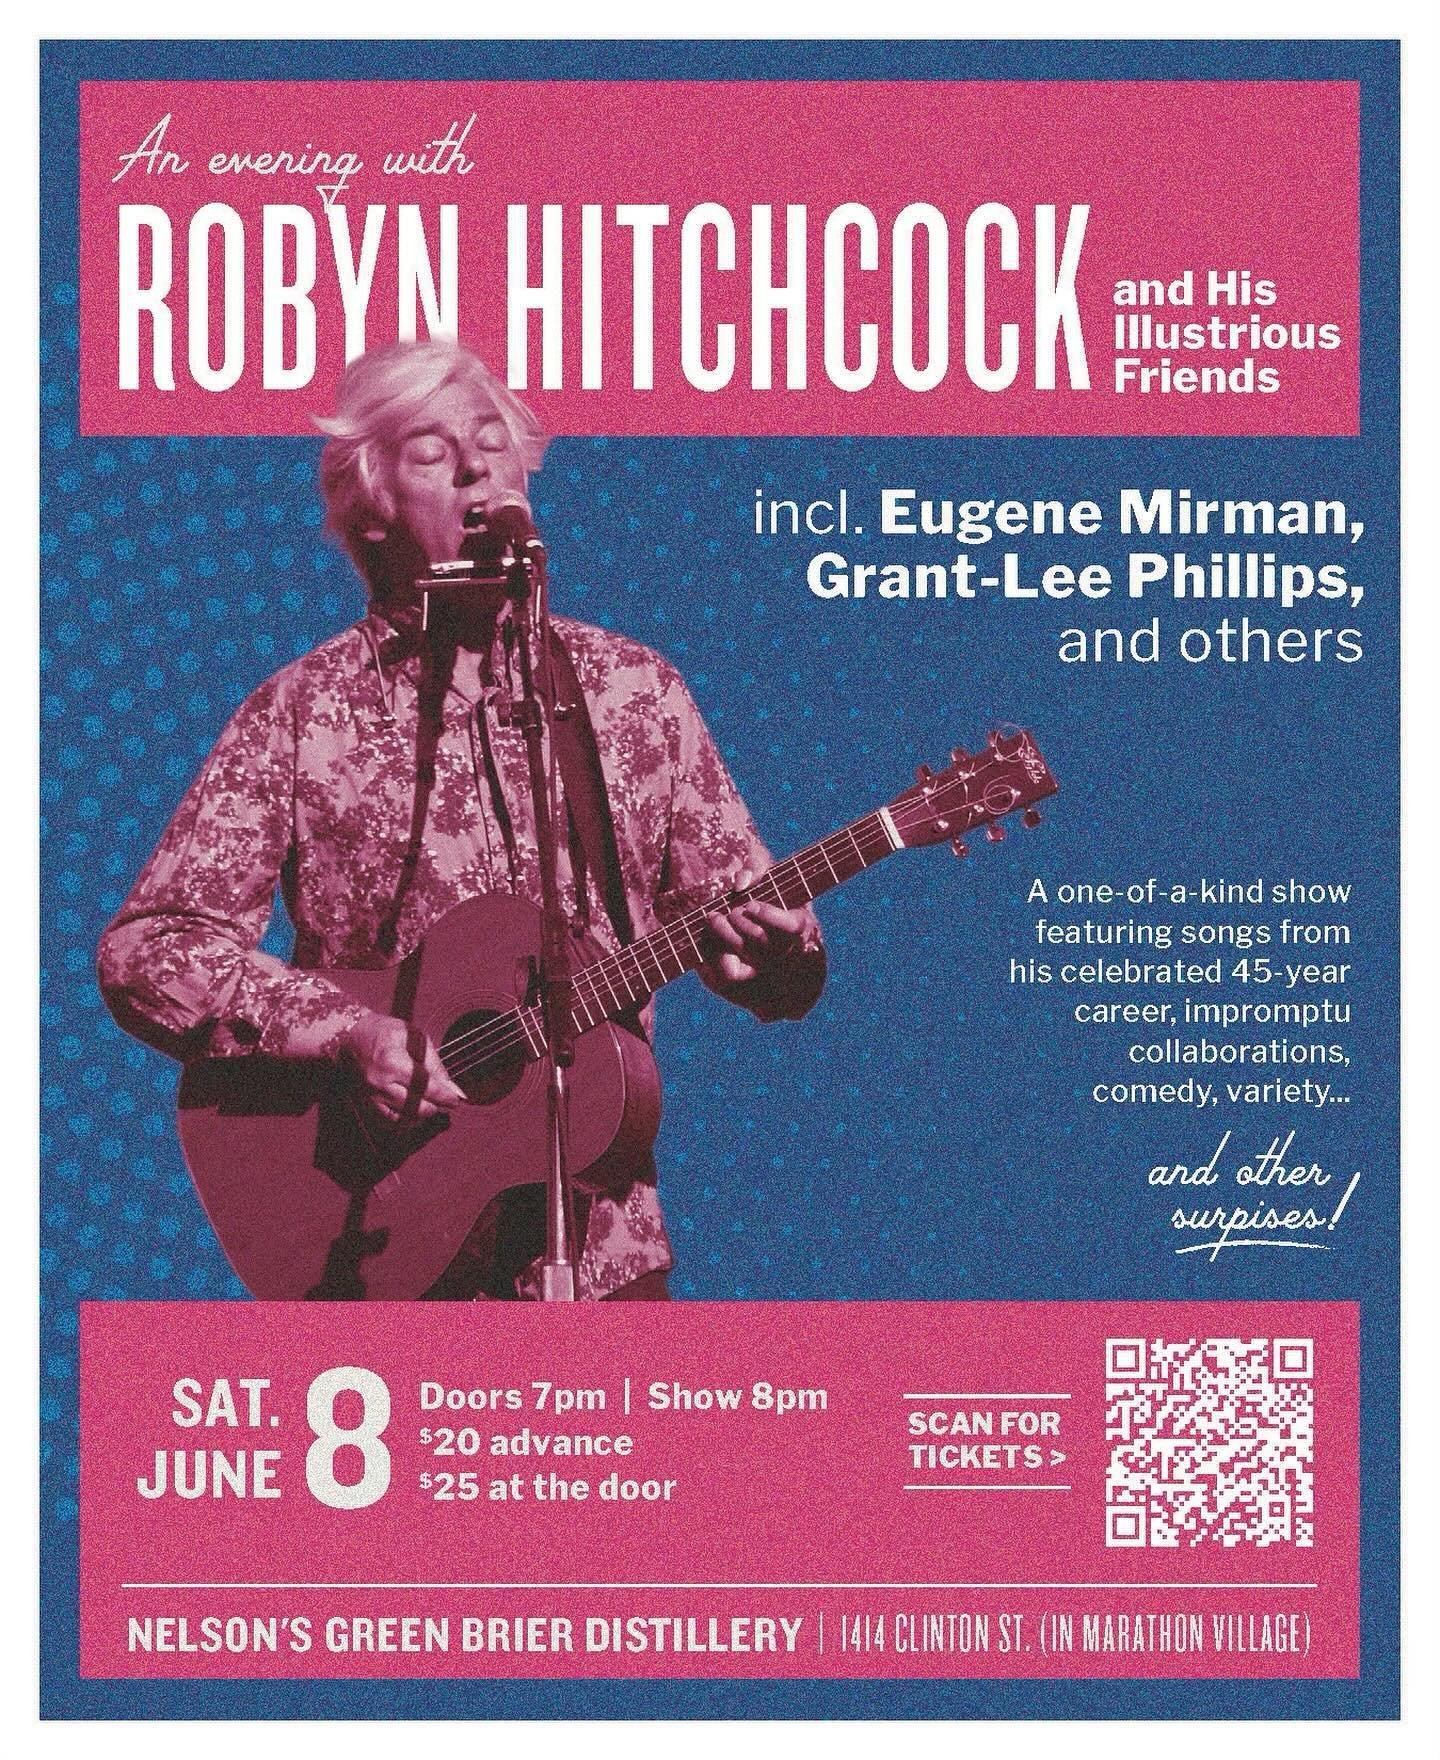 Nashville! I am performing in your wonderful town June 8 as part of @robynhitchcockofficial and His Illustrious Friends! Tix link in bio. Come!